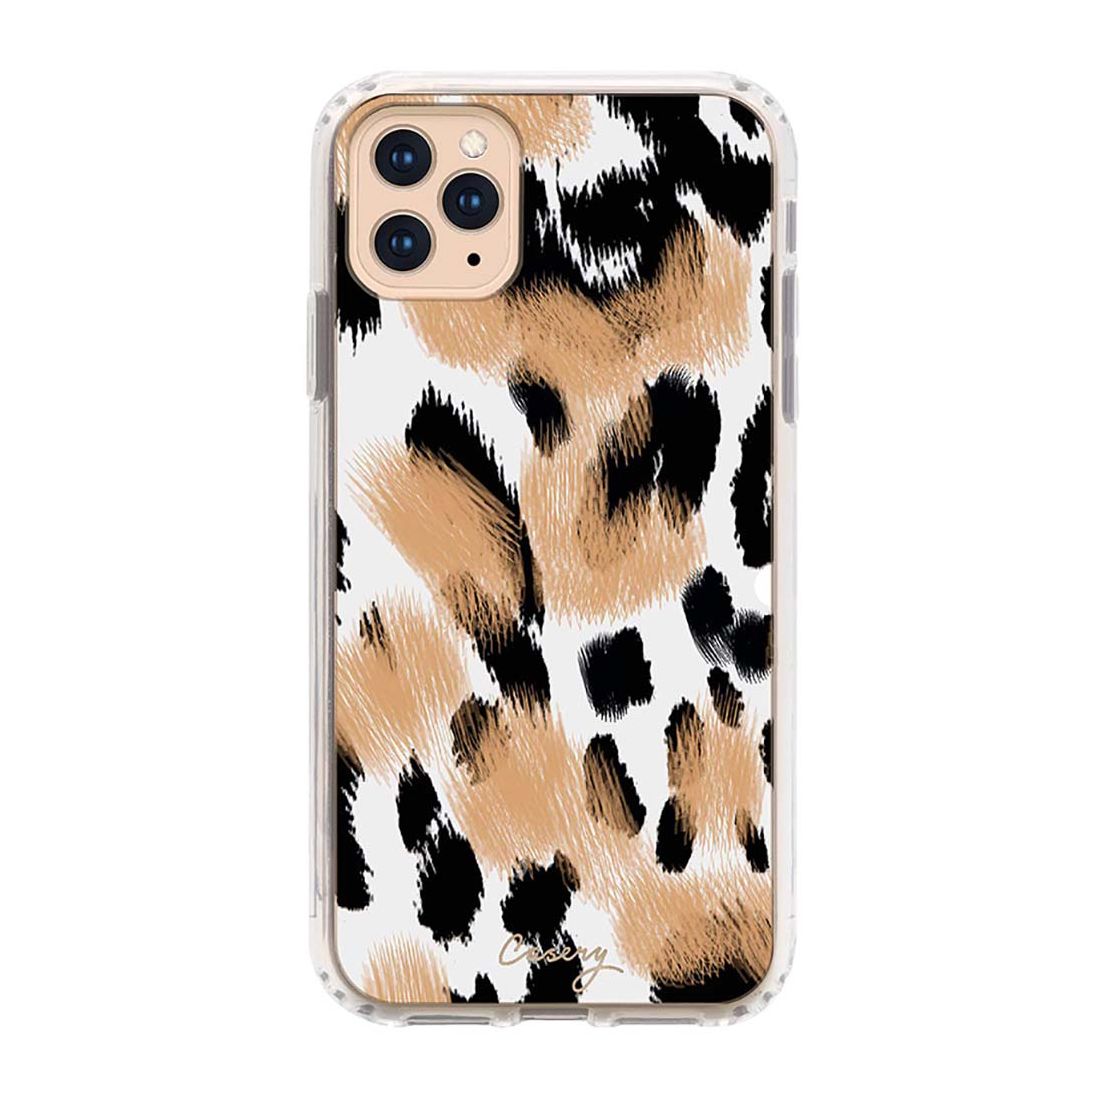 Casery Primal Print Case for iPhone 12 Pro Max